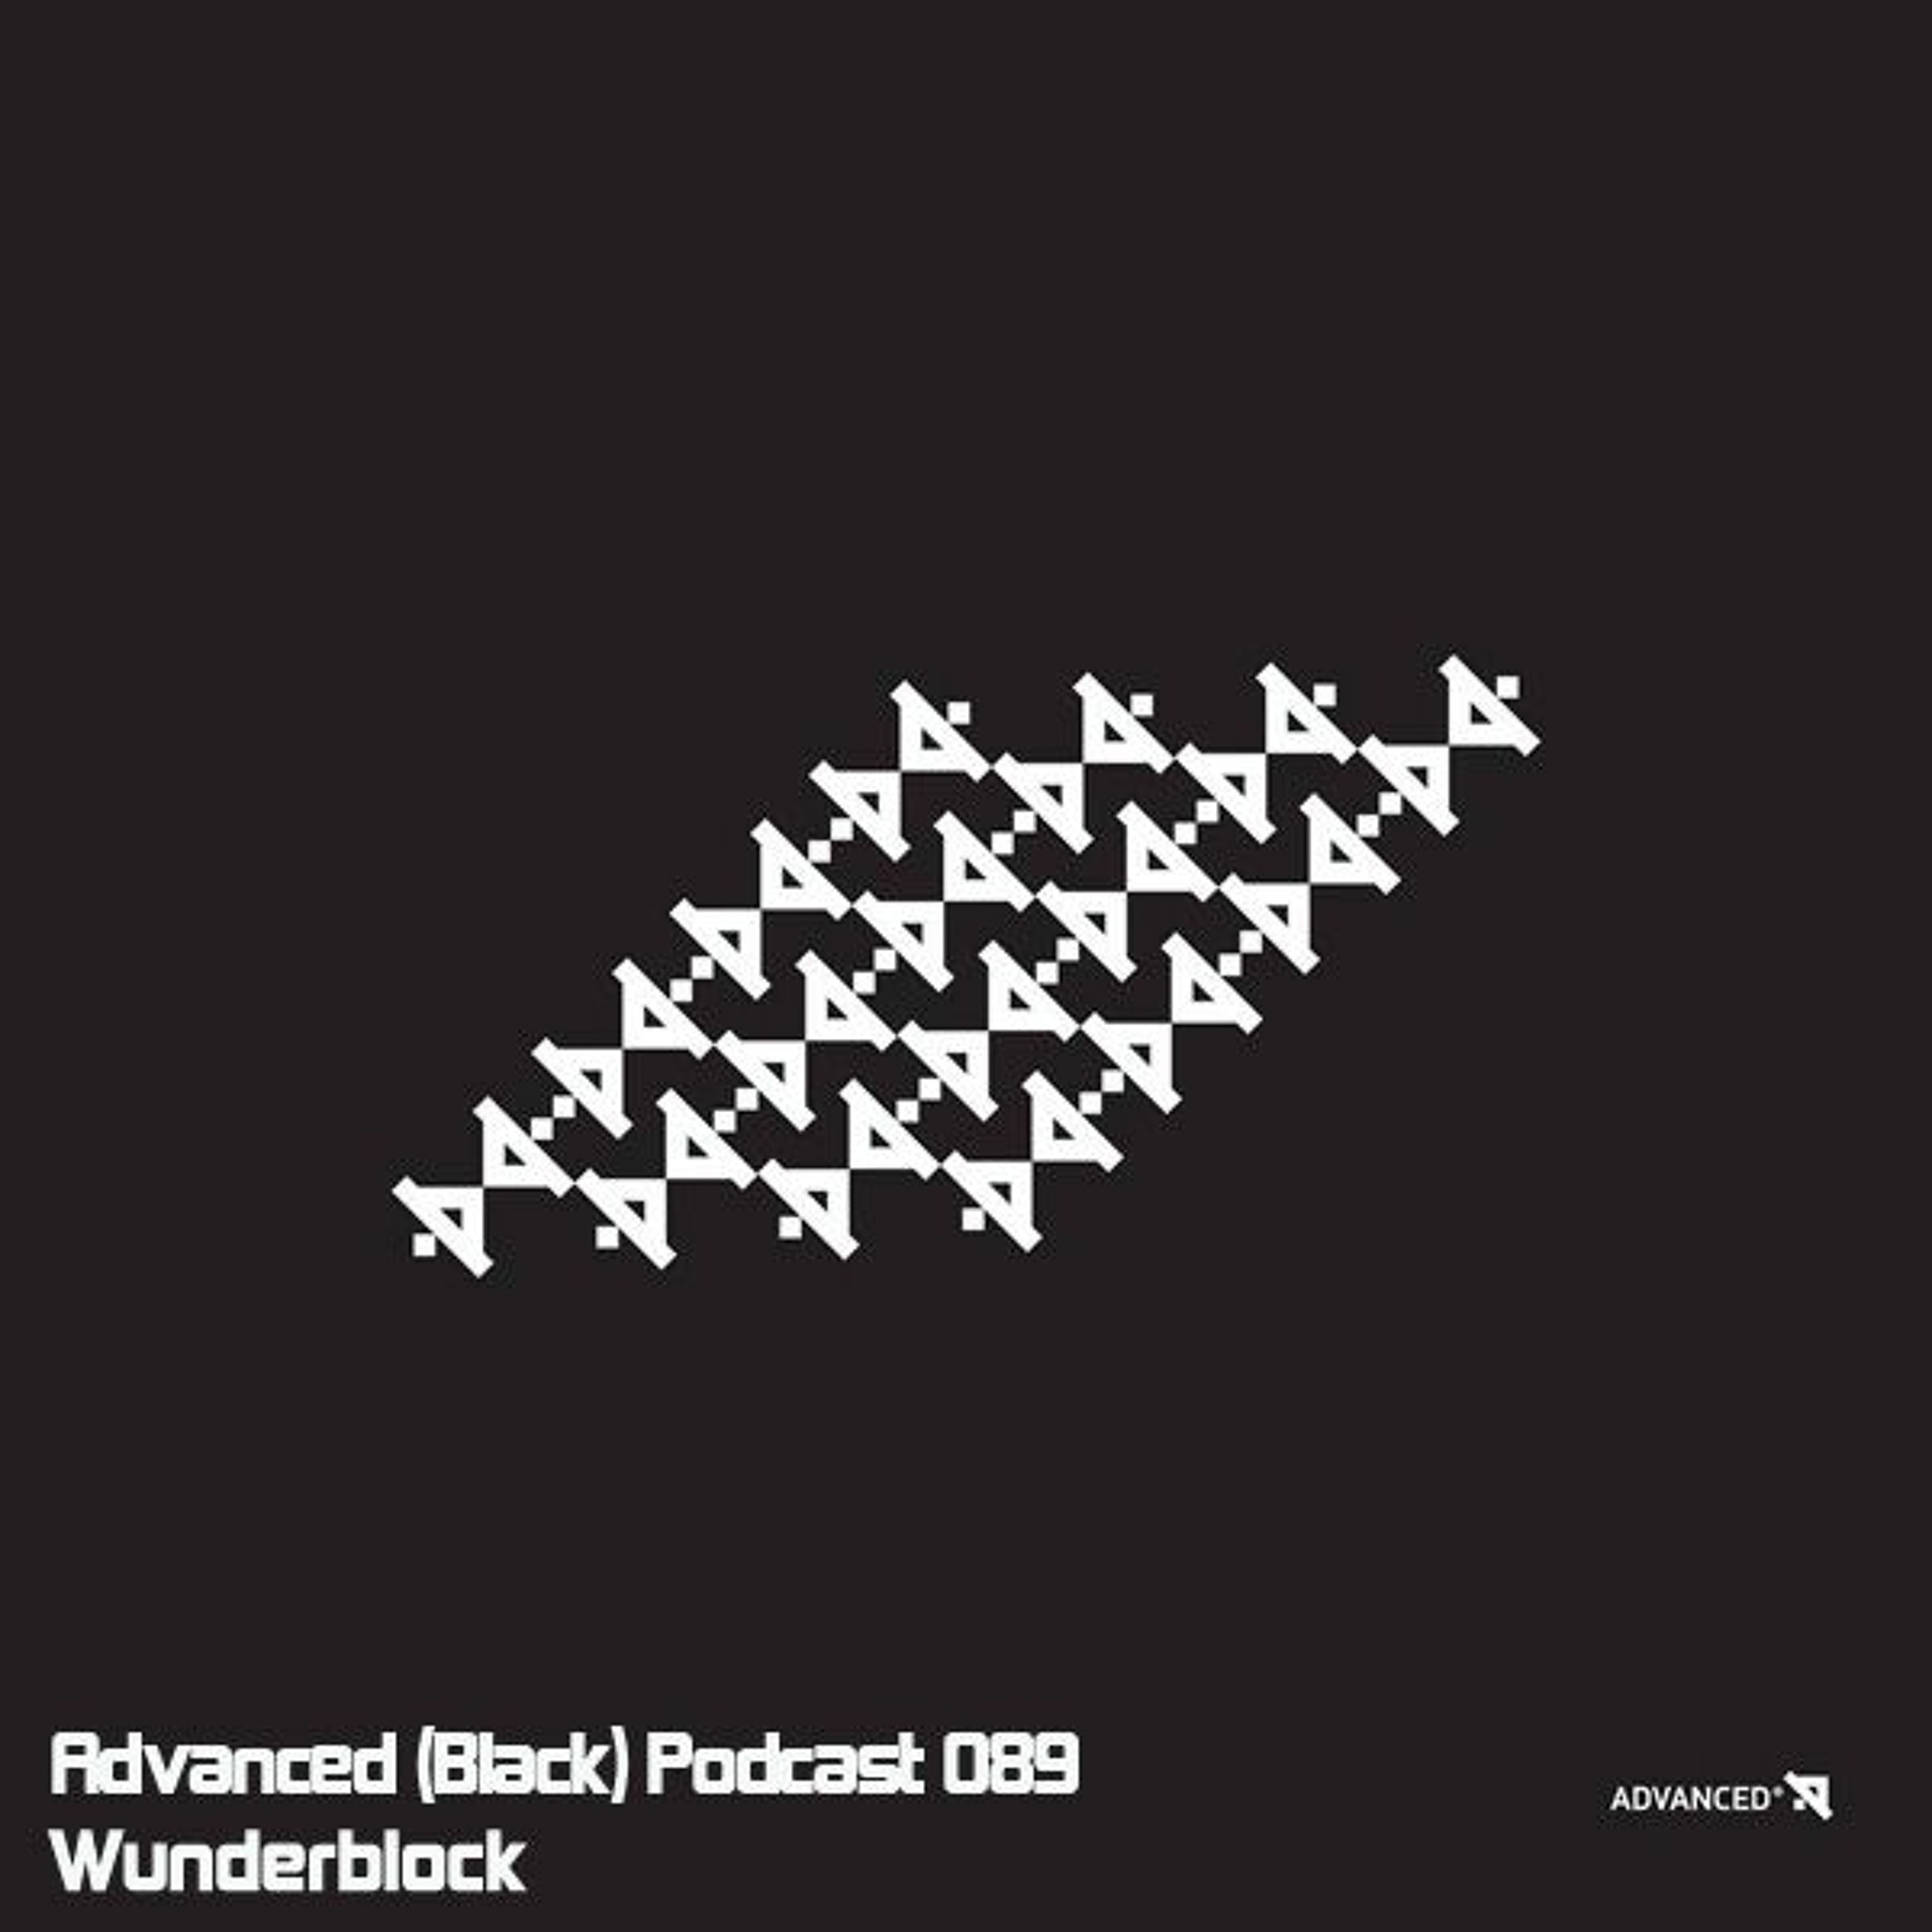 Advanced (Black) Podcast 089 with Wunderblock